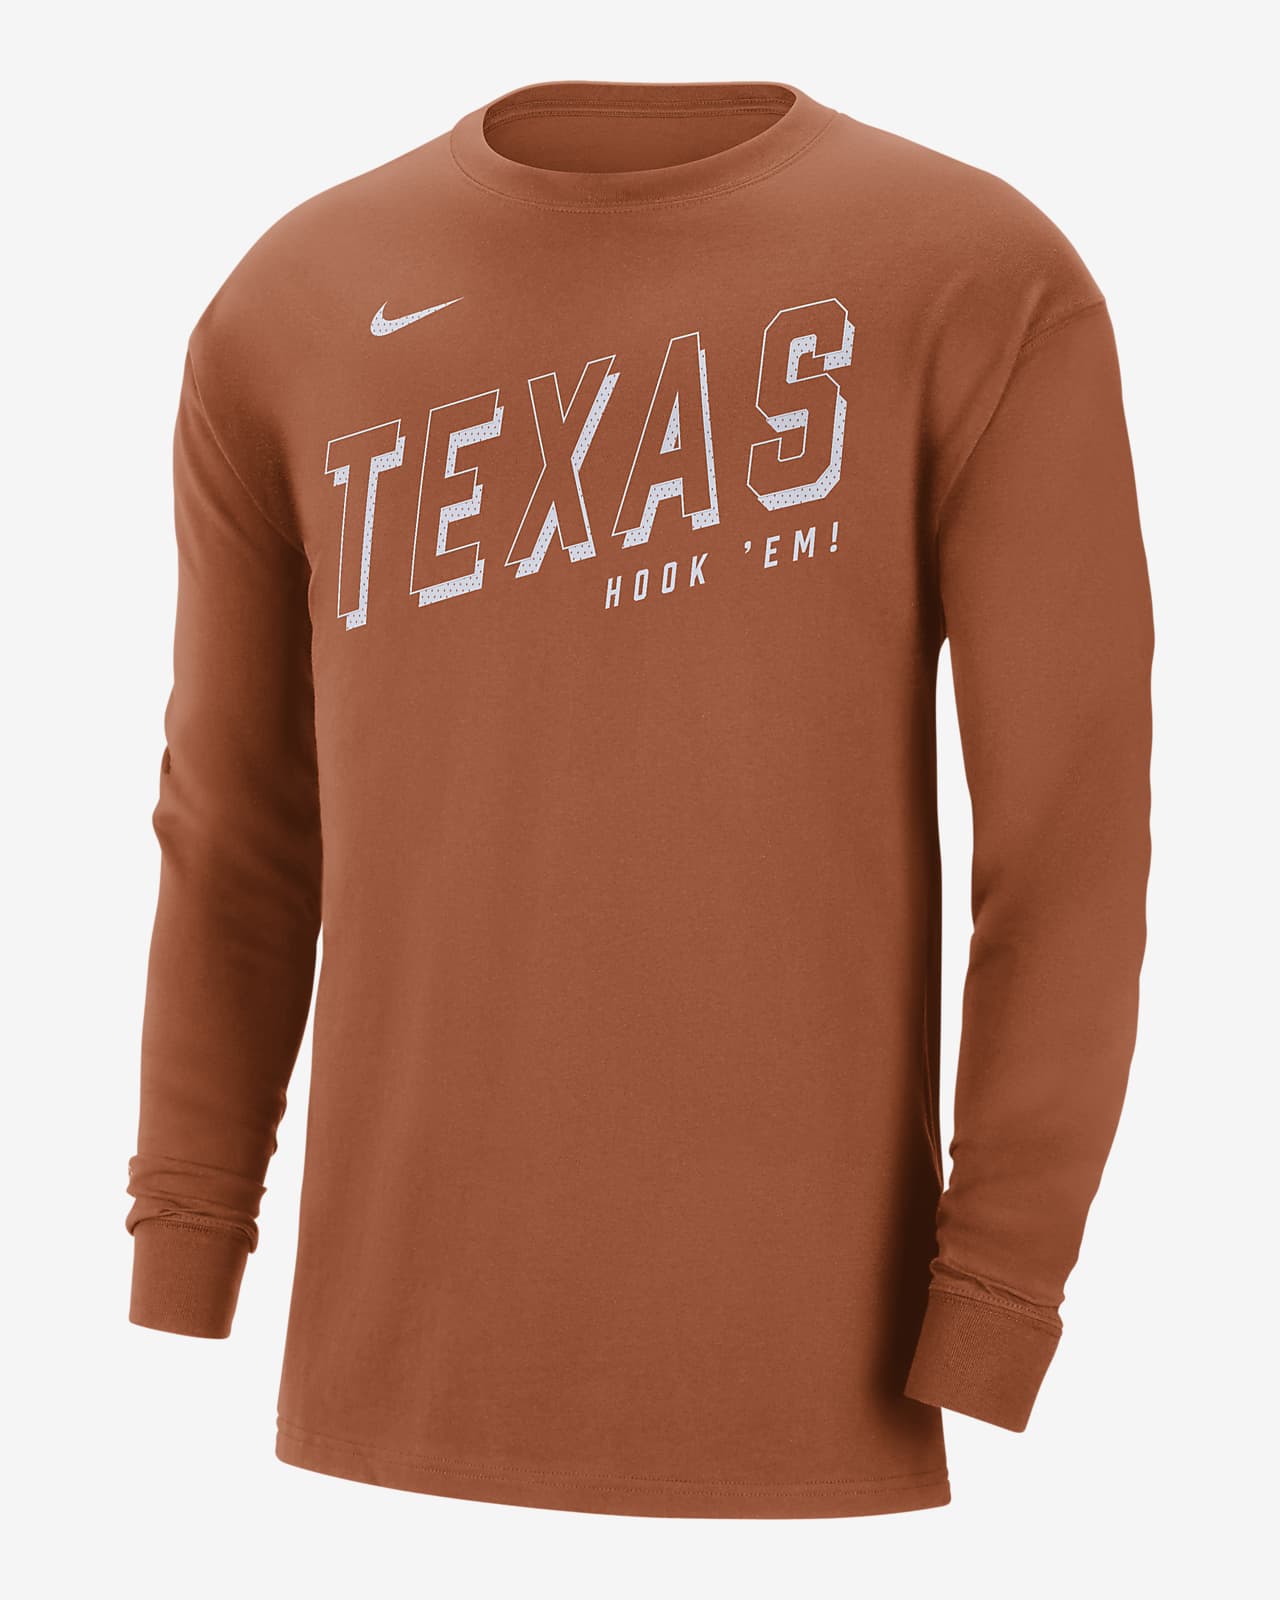 TEXAS BASKETBALL HOOK 'EM T-shirt - Print your thoughts. Tell your stories.